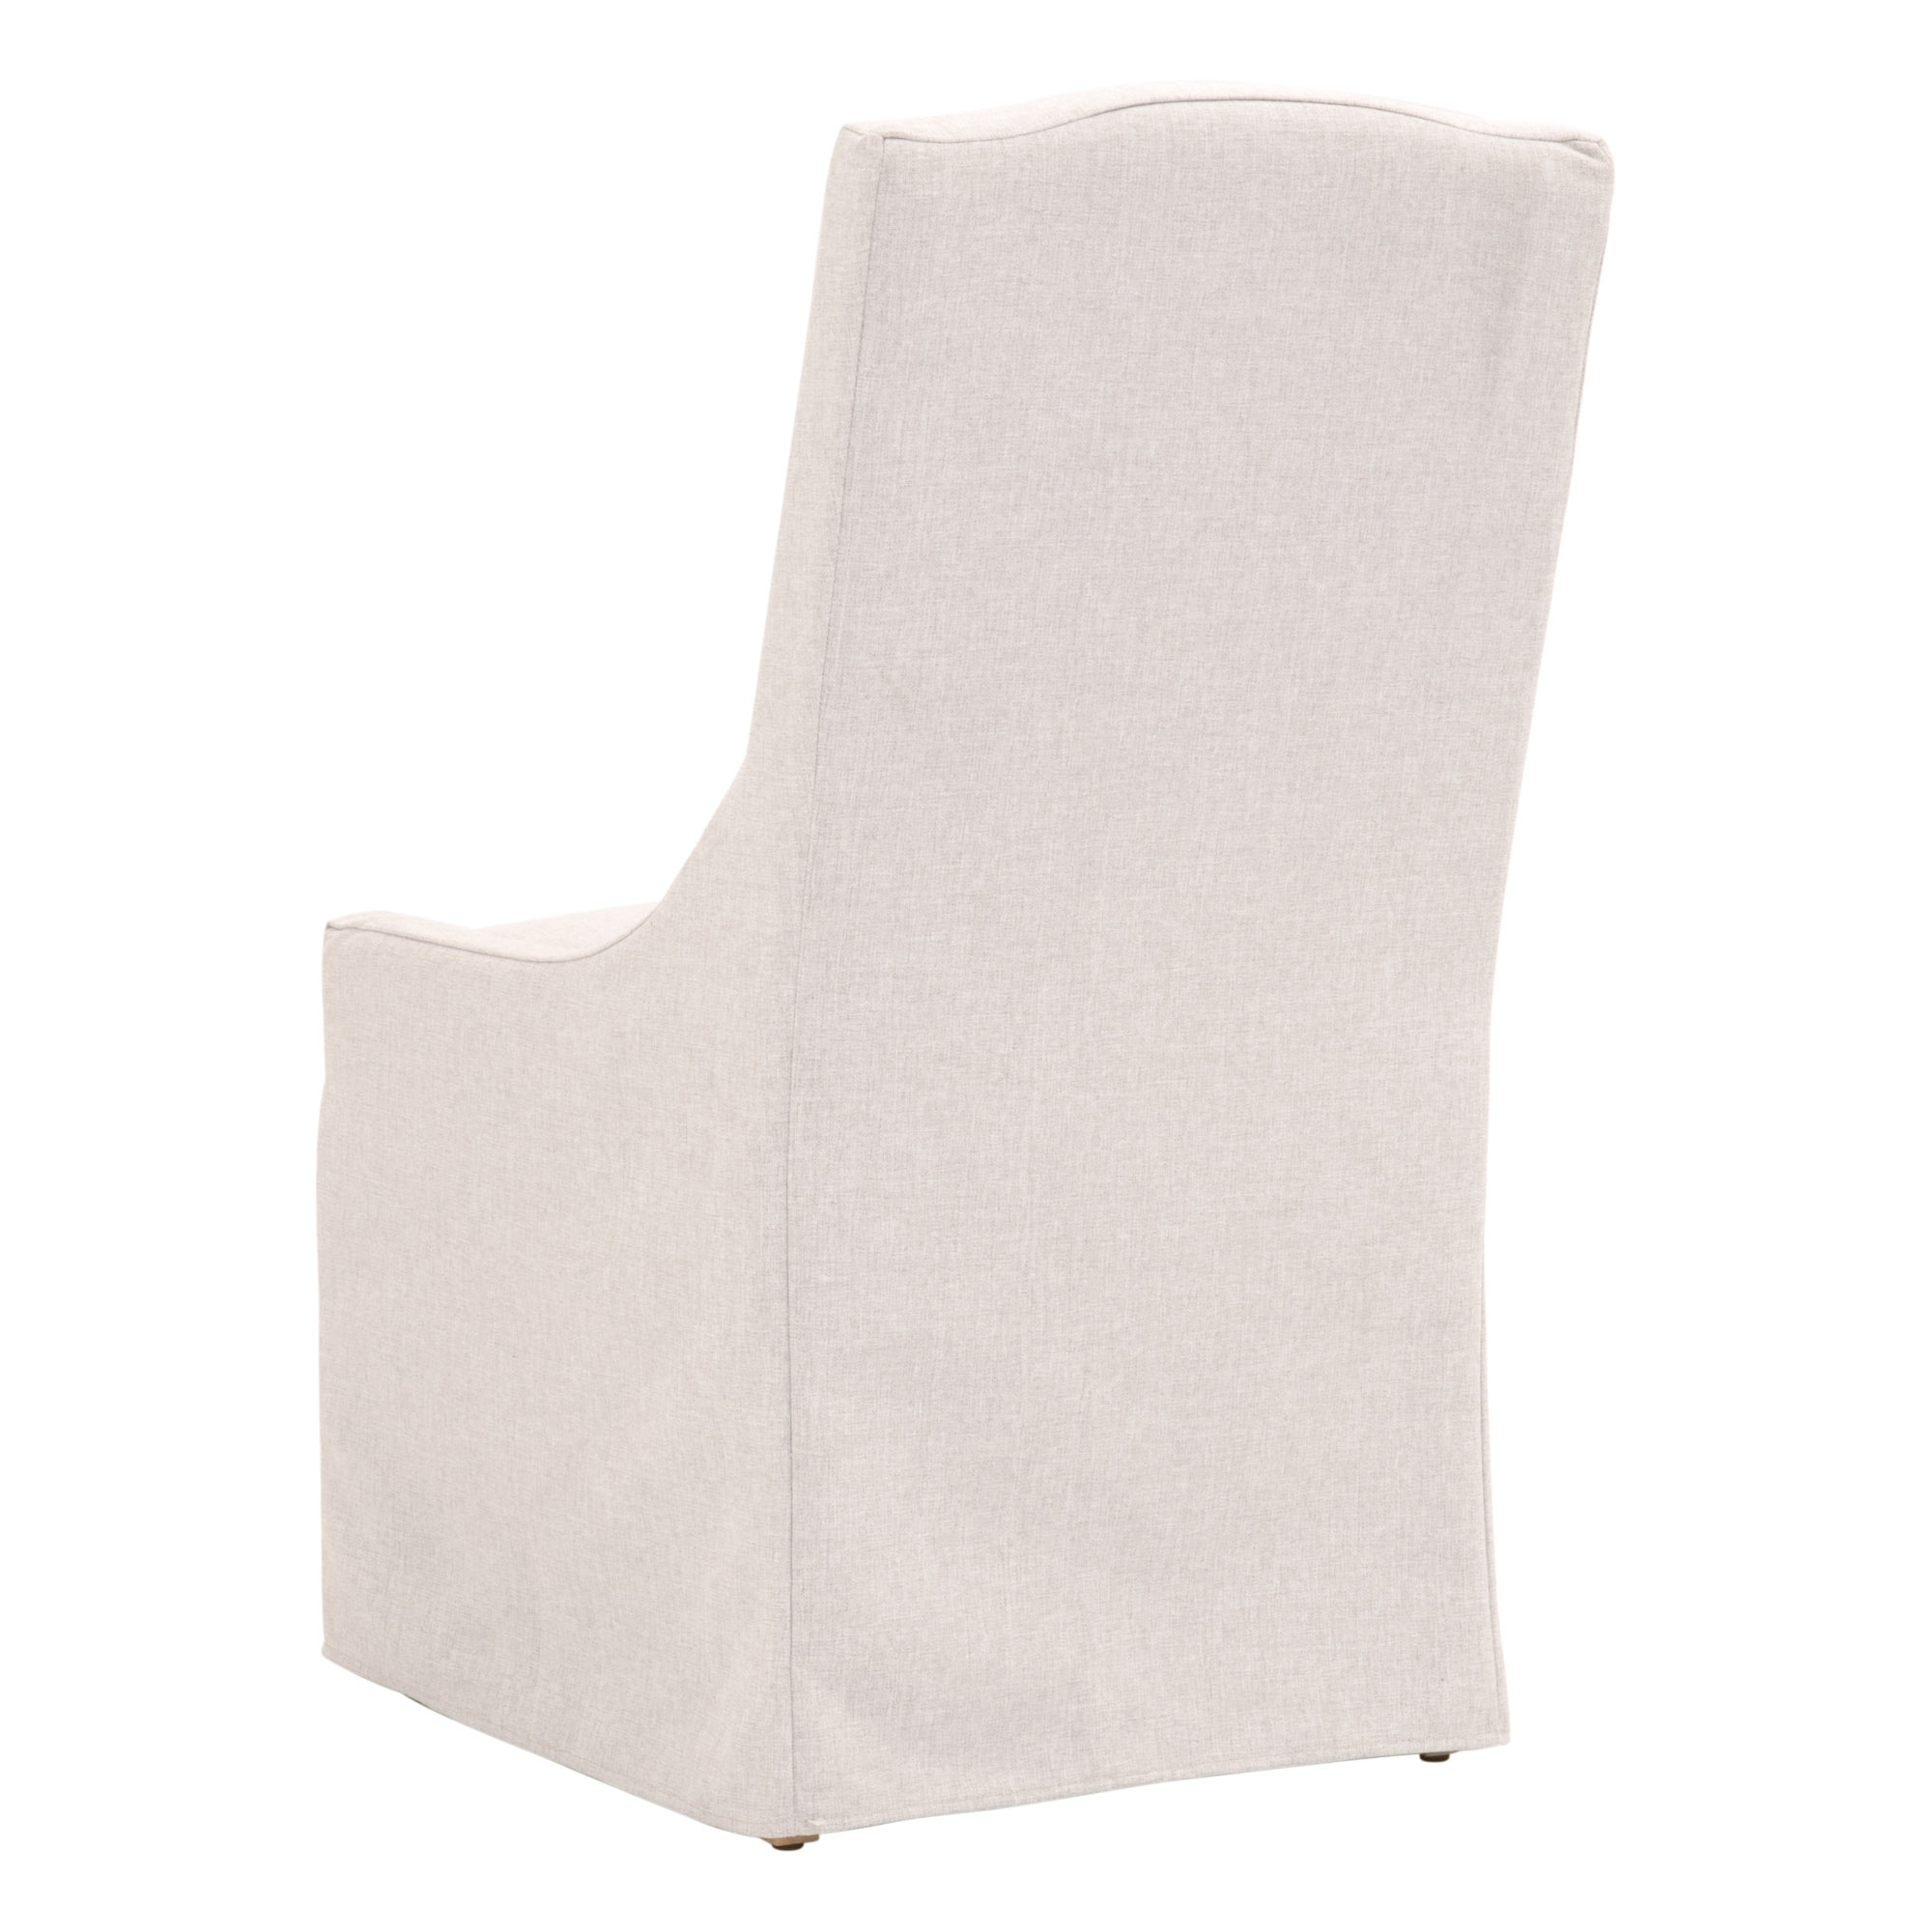 Odessa Outdoor Slipcover Dining Chair, White - Image 3